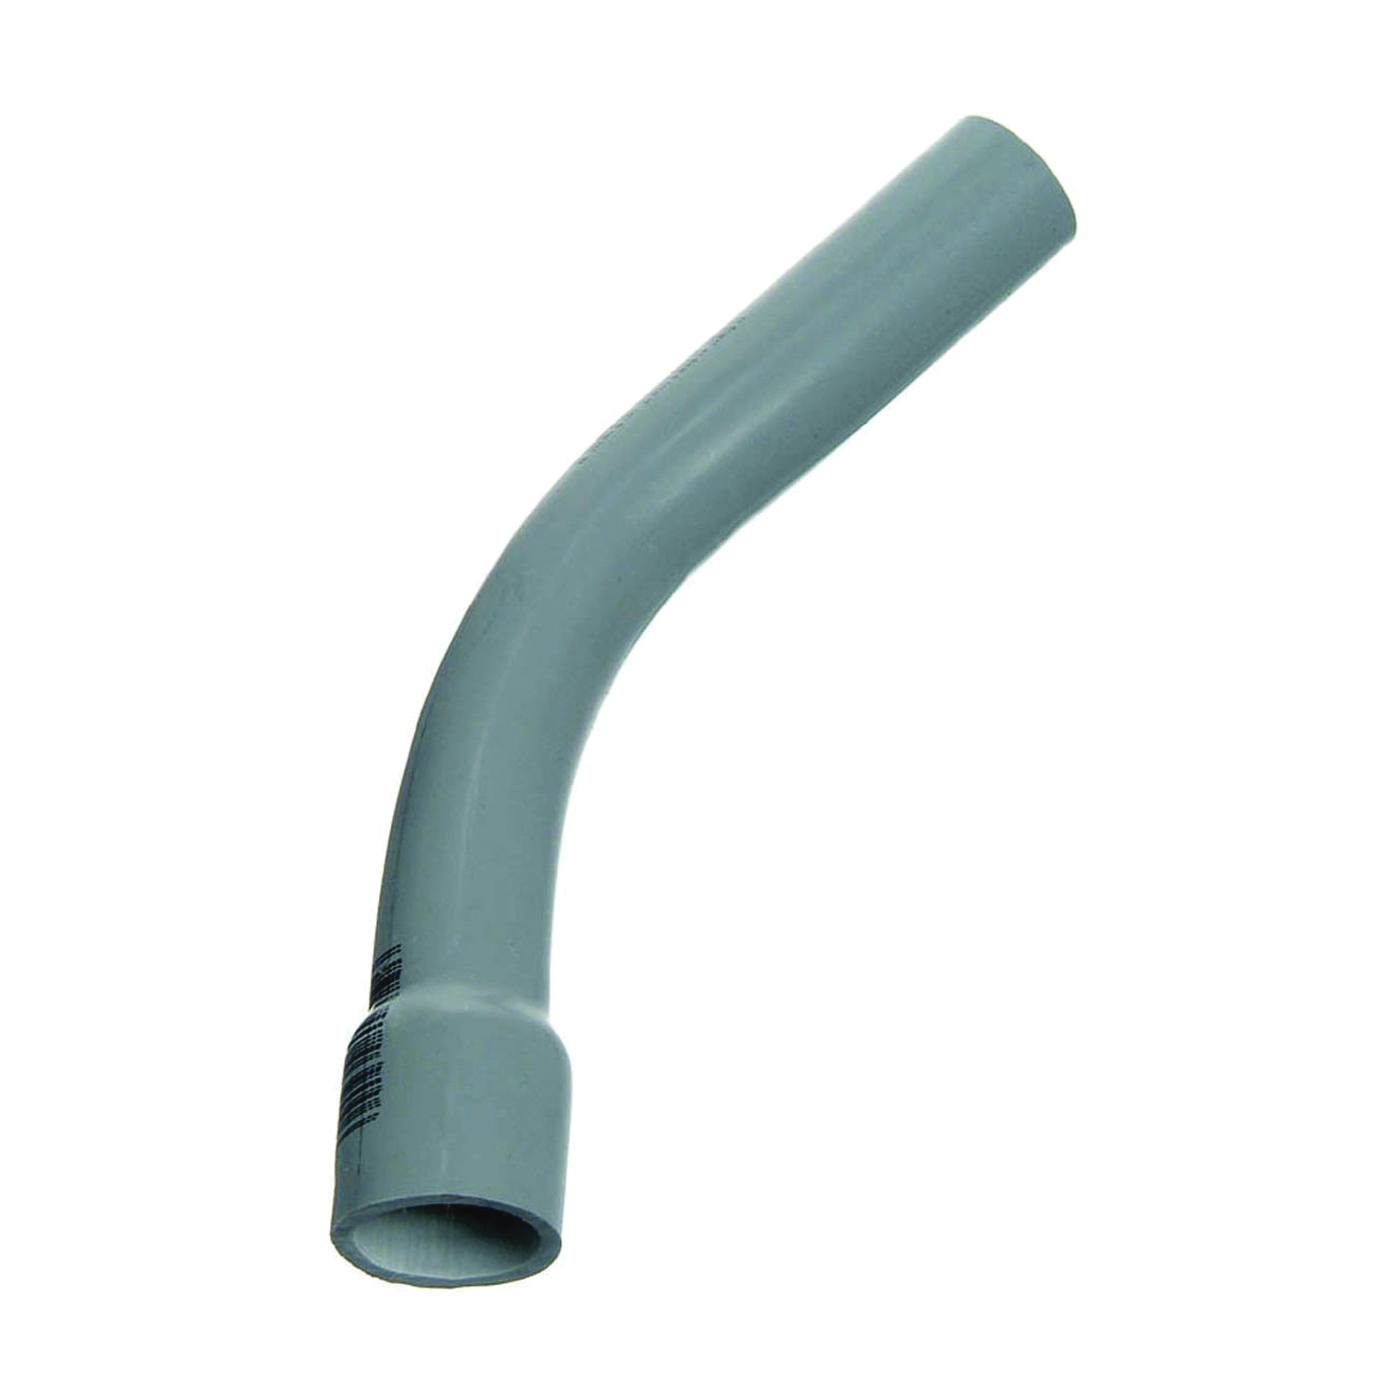 UA7AGB-CAR Elbow, 1-1/4 in Trade Size, 45 deg Angle, SCH 80 Schedule Rating, PVC, Plain End, Gray